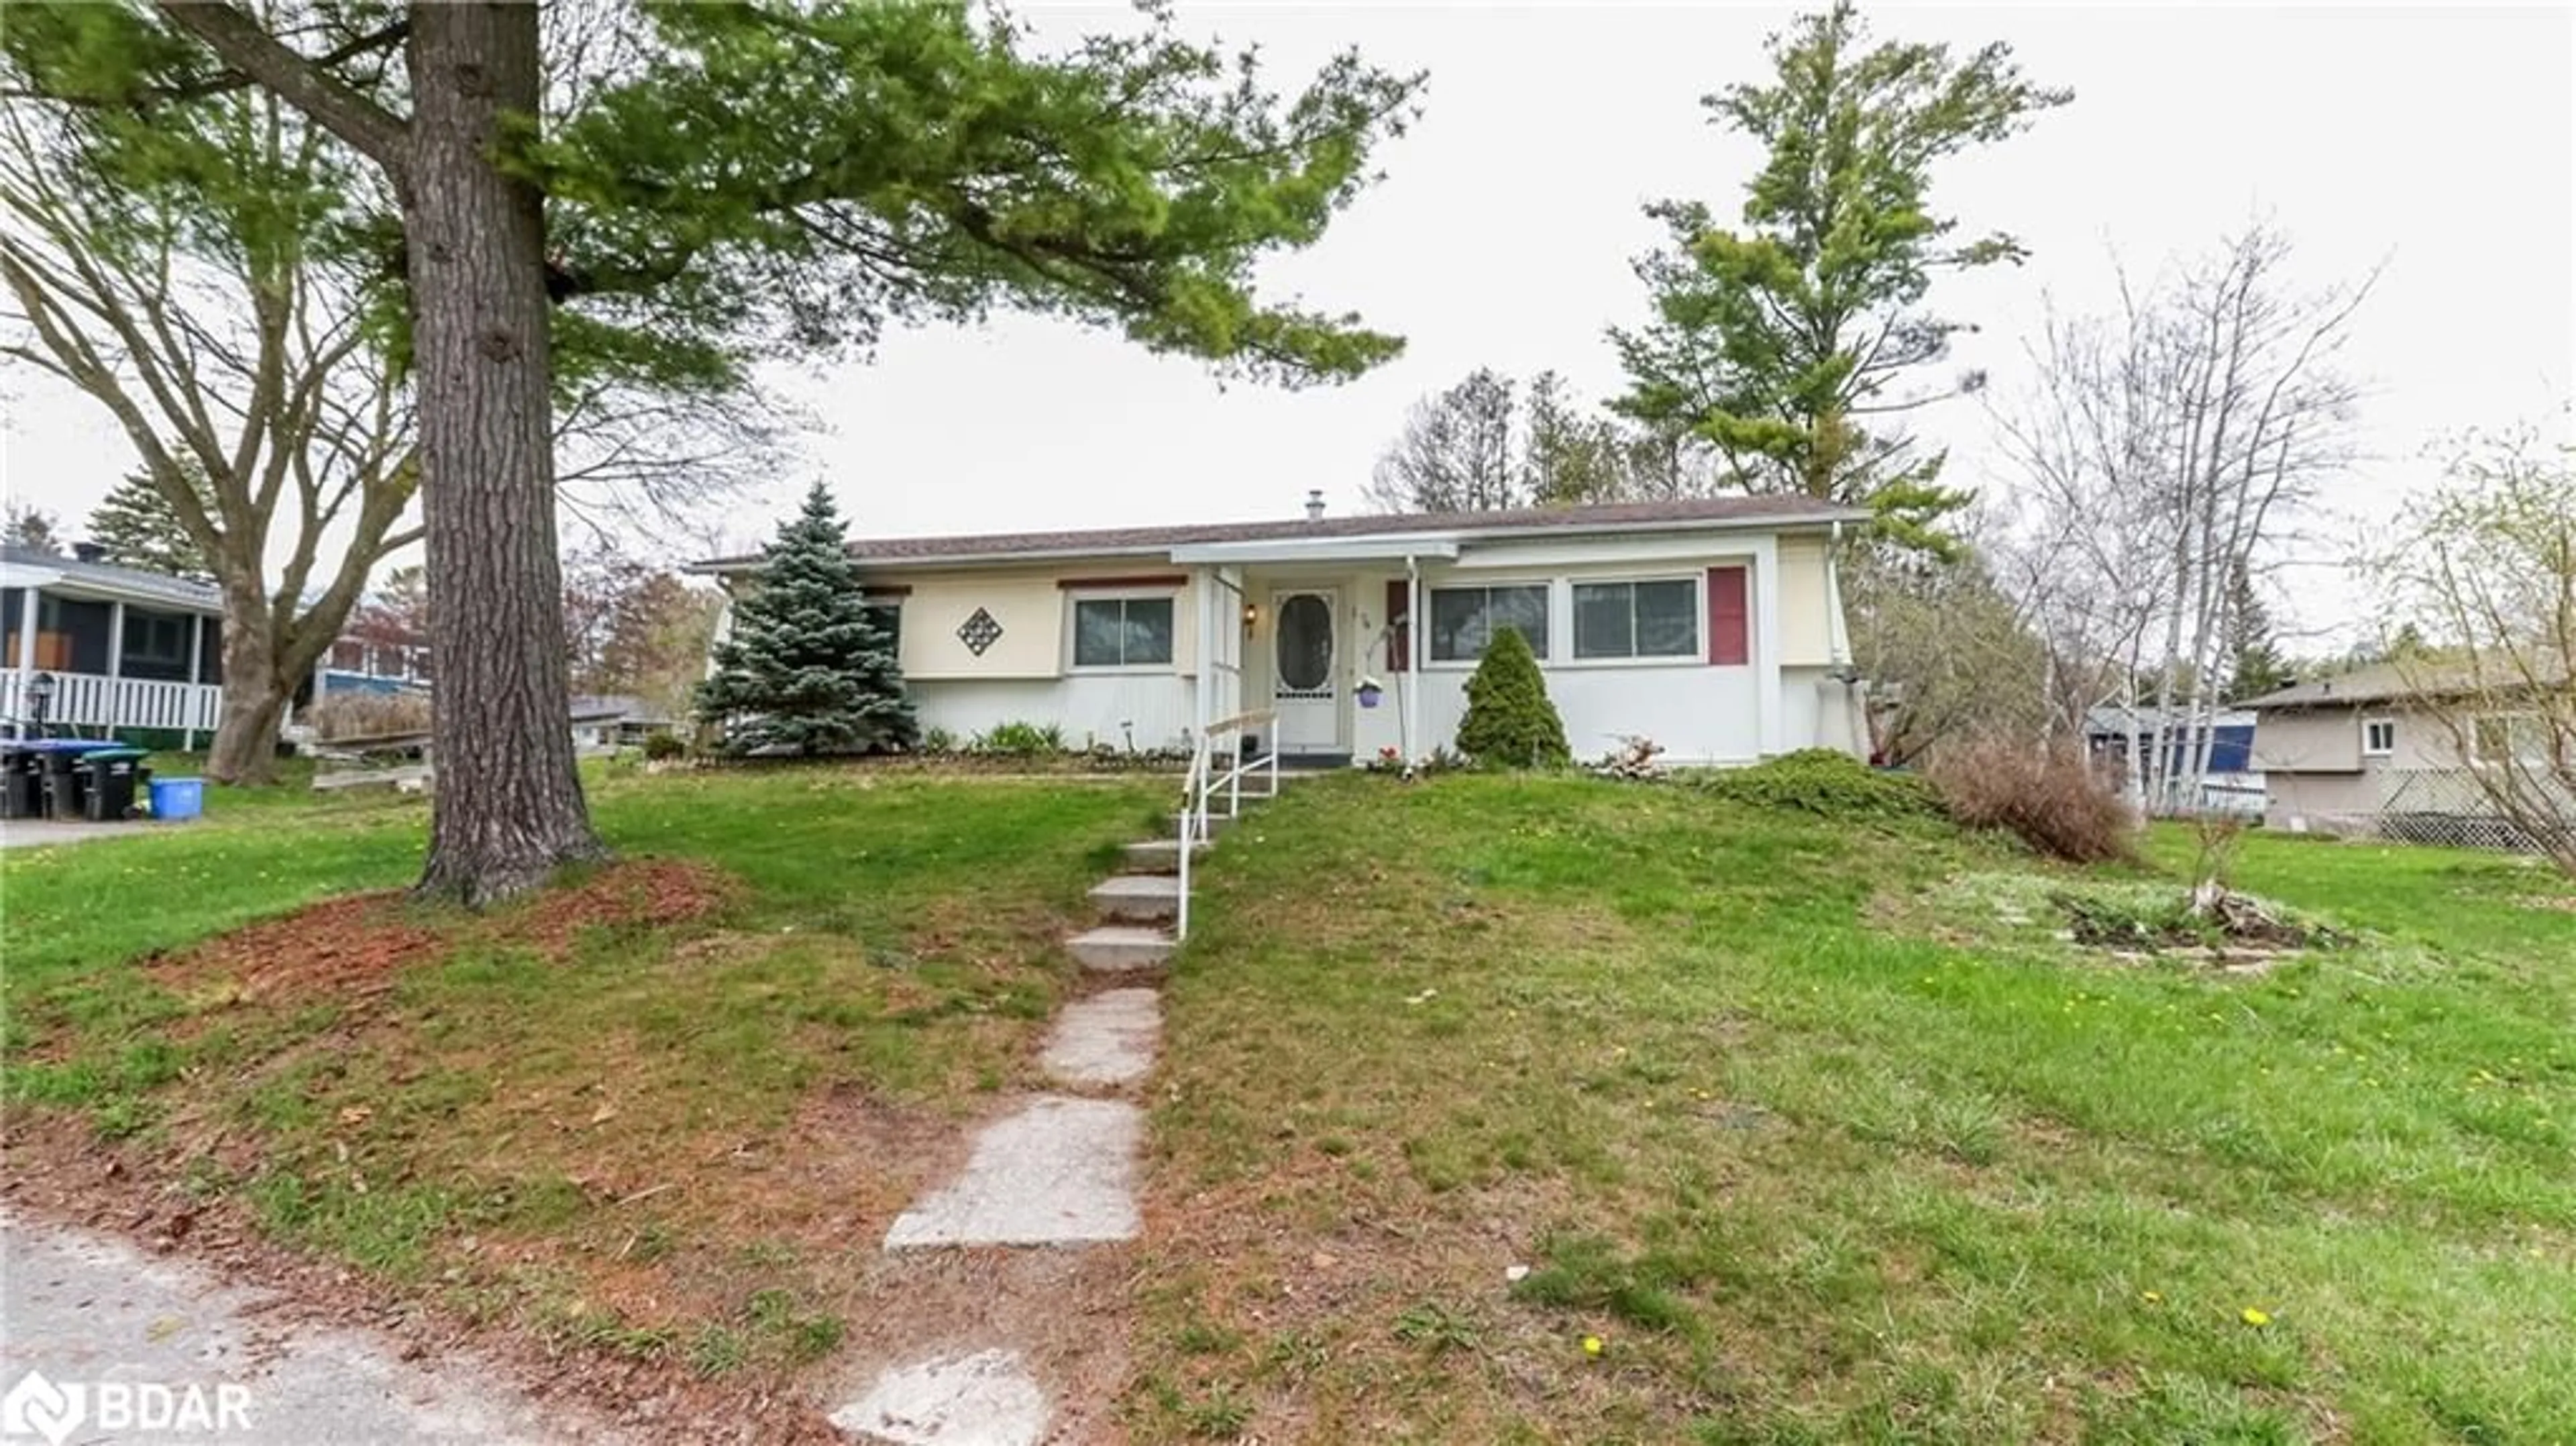 Outside view for 76 Main St, Innisfil Ontario L9S 1M4